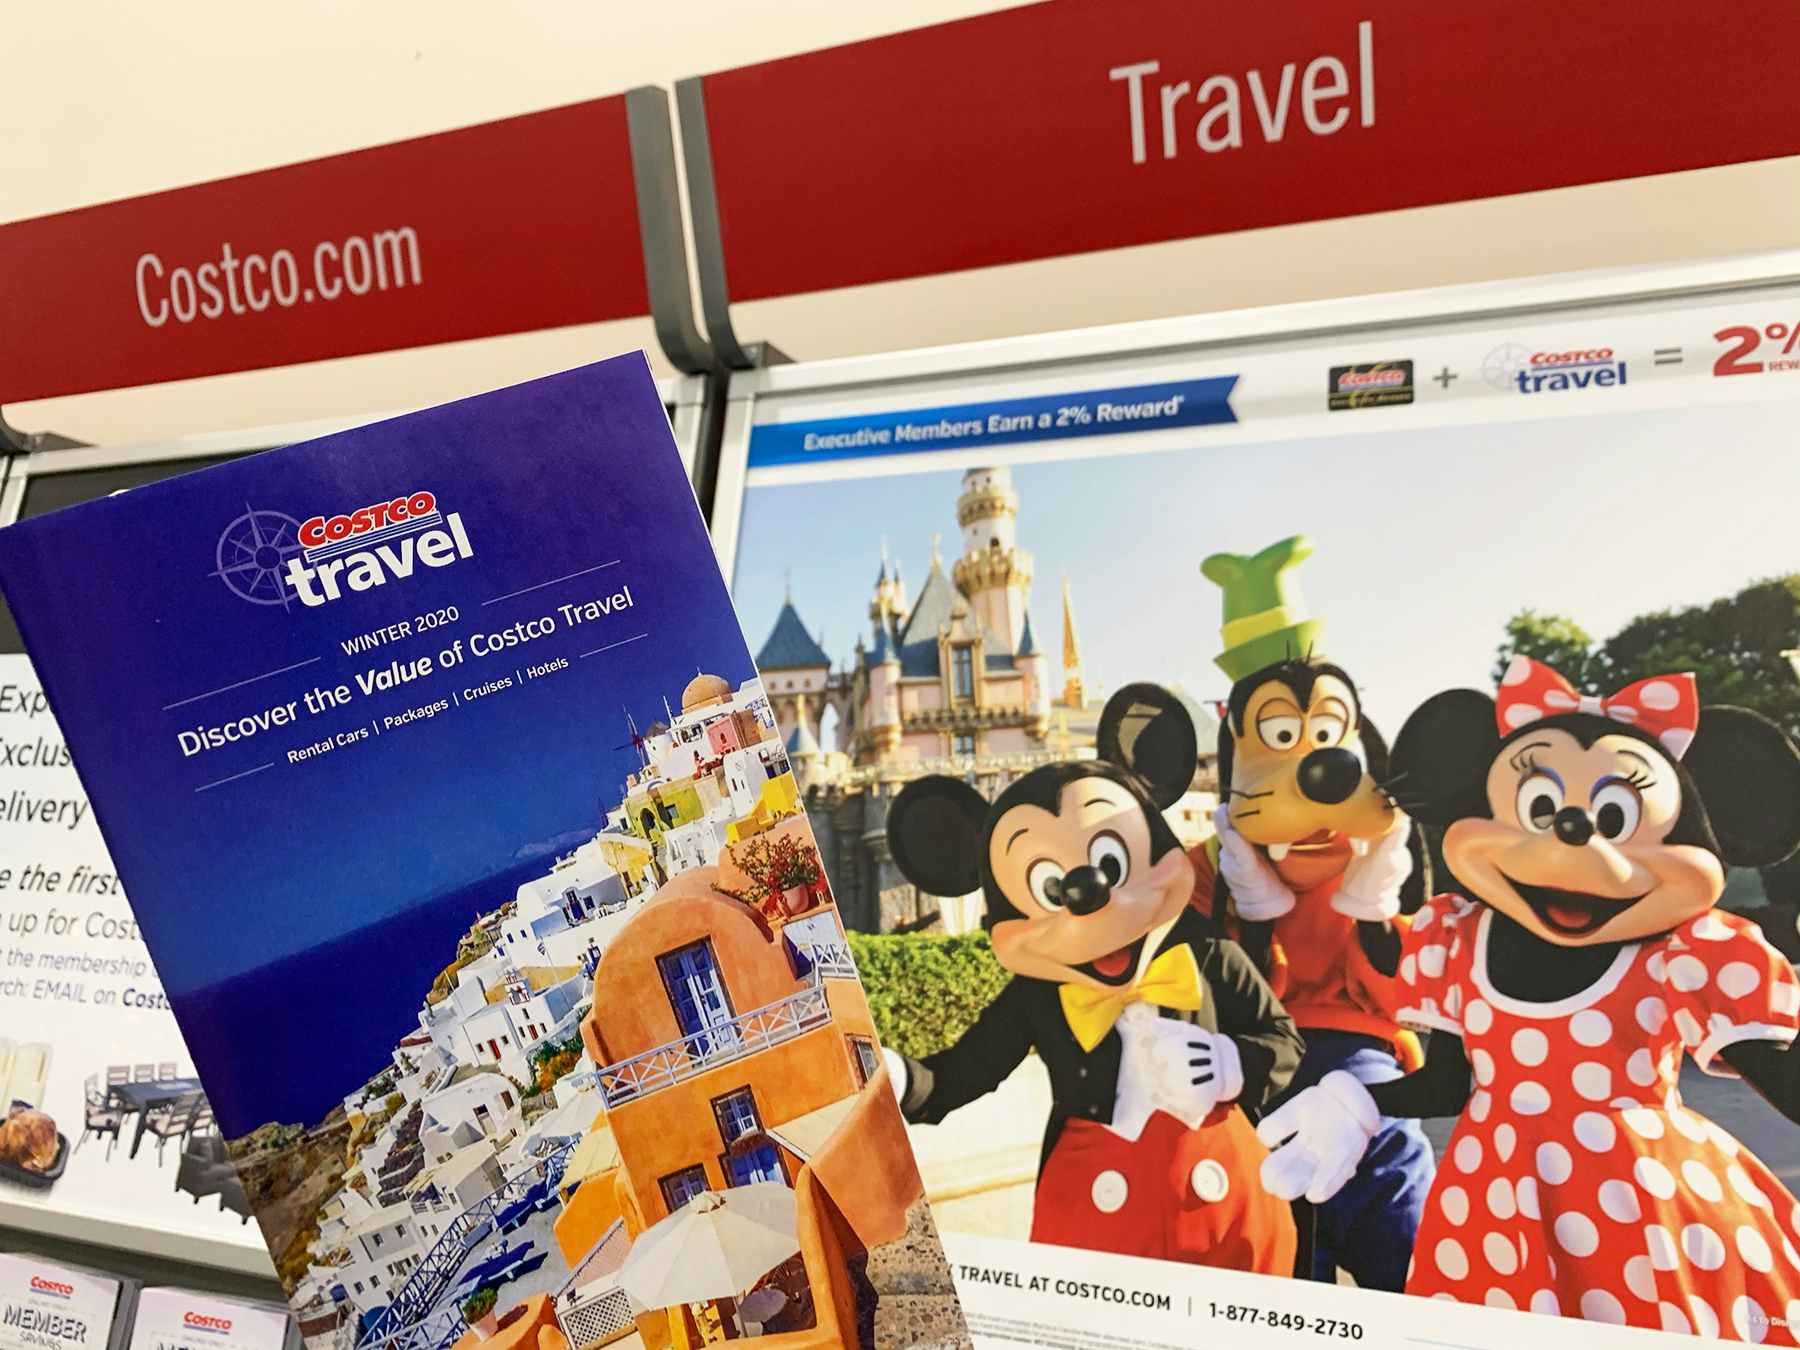 A costco travel pamphlet in front of a Disney sign showing Mickey, and Minnie in Costco.